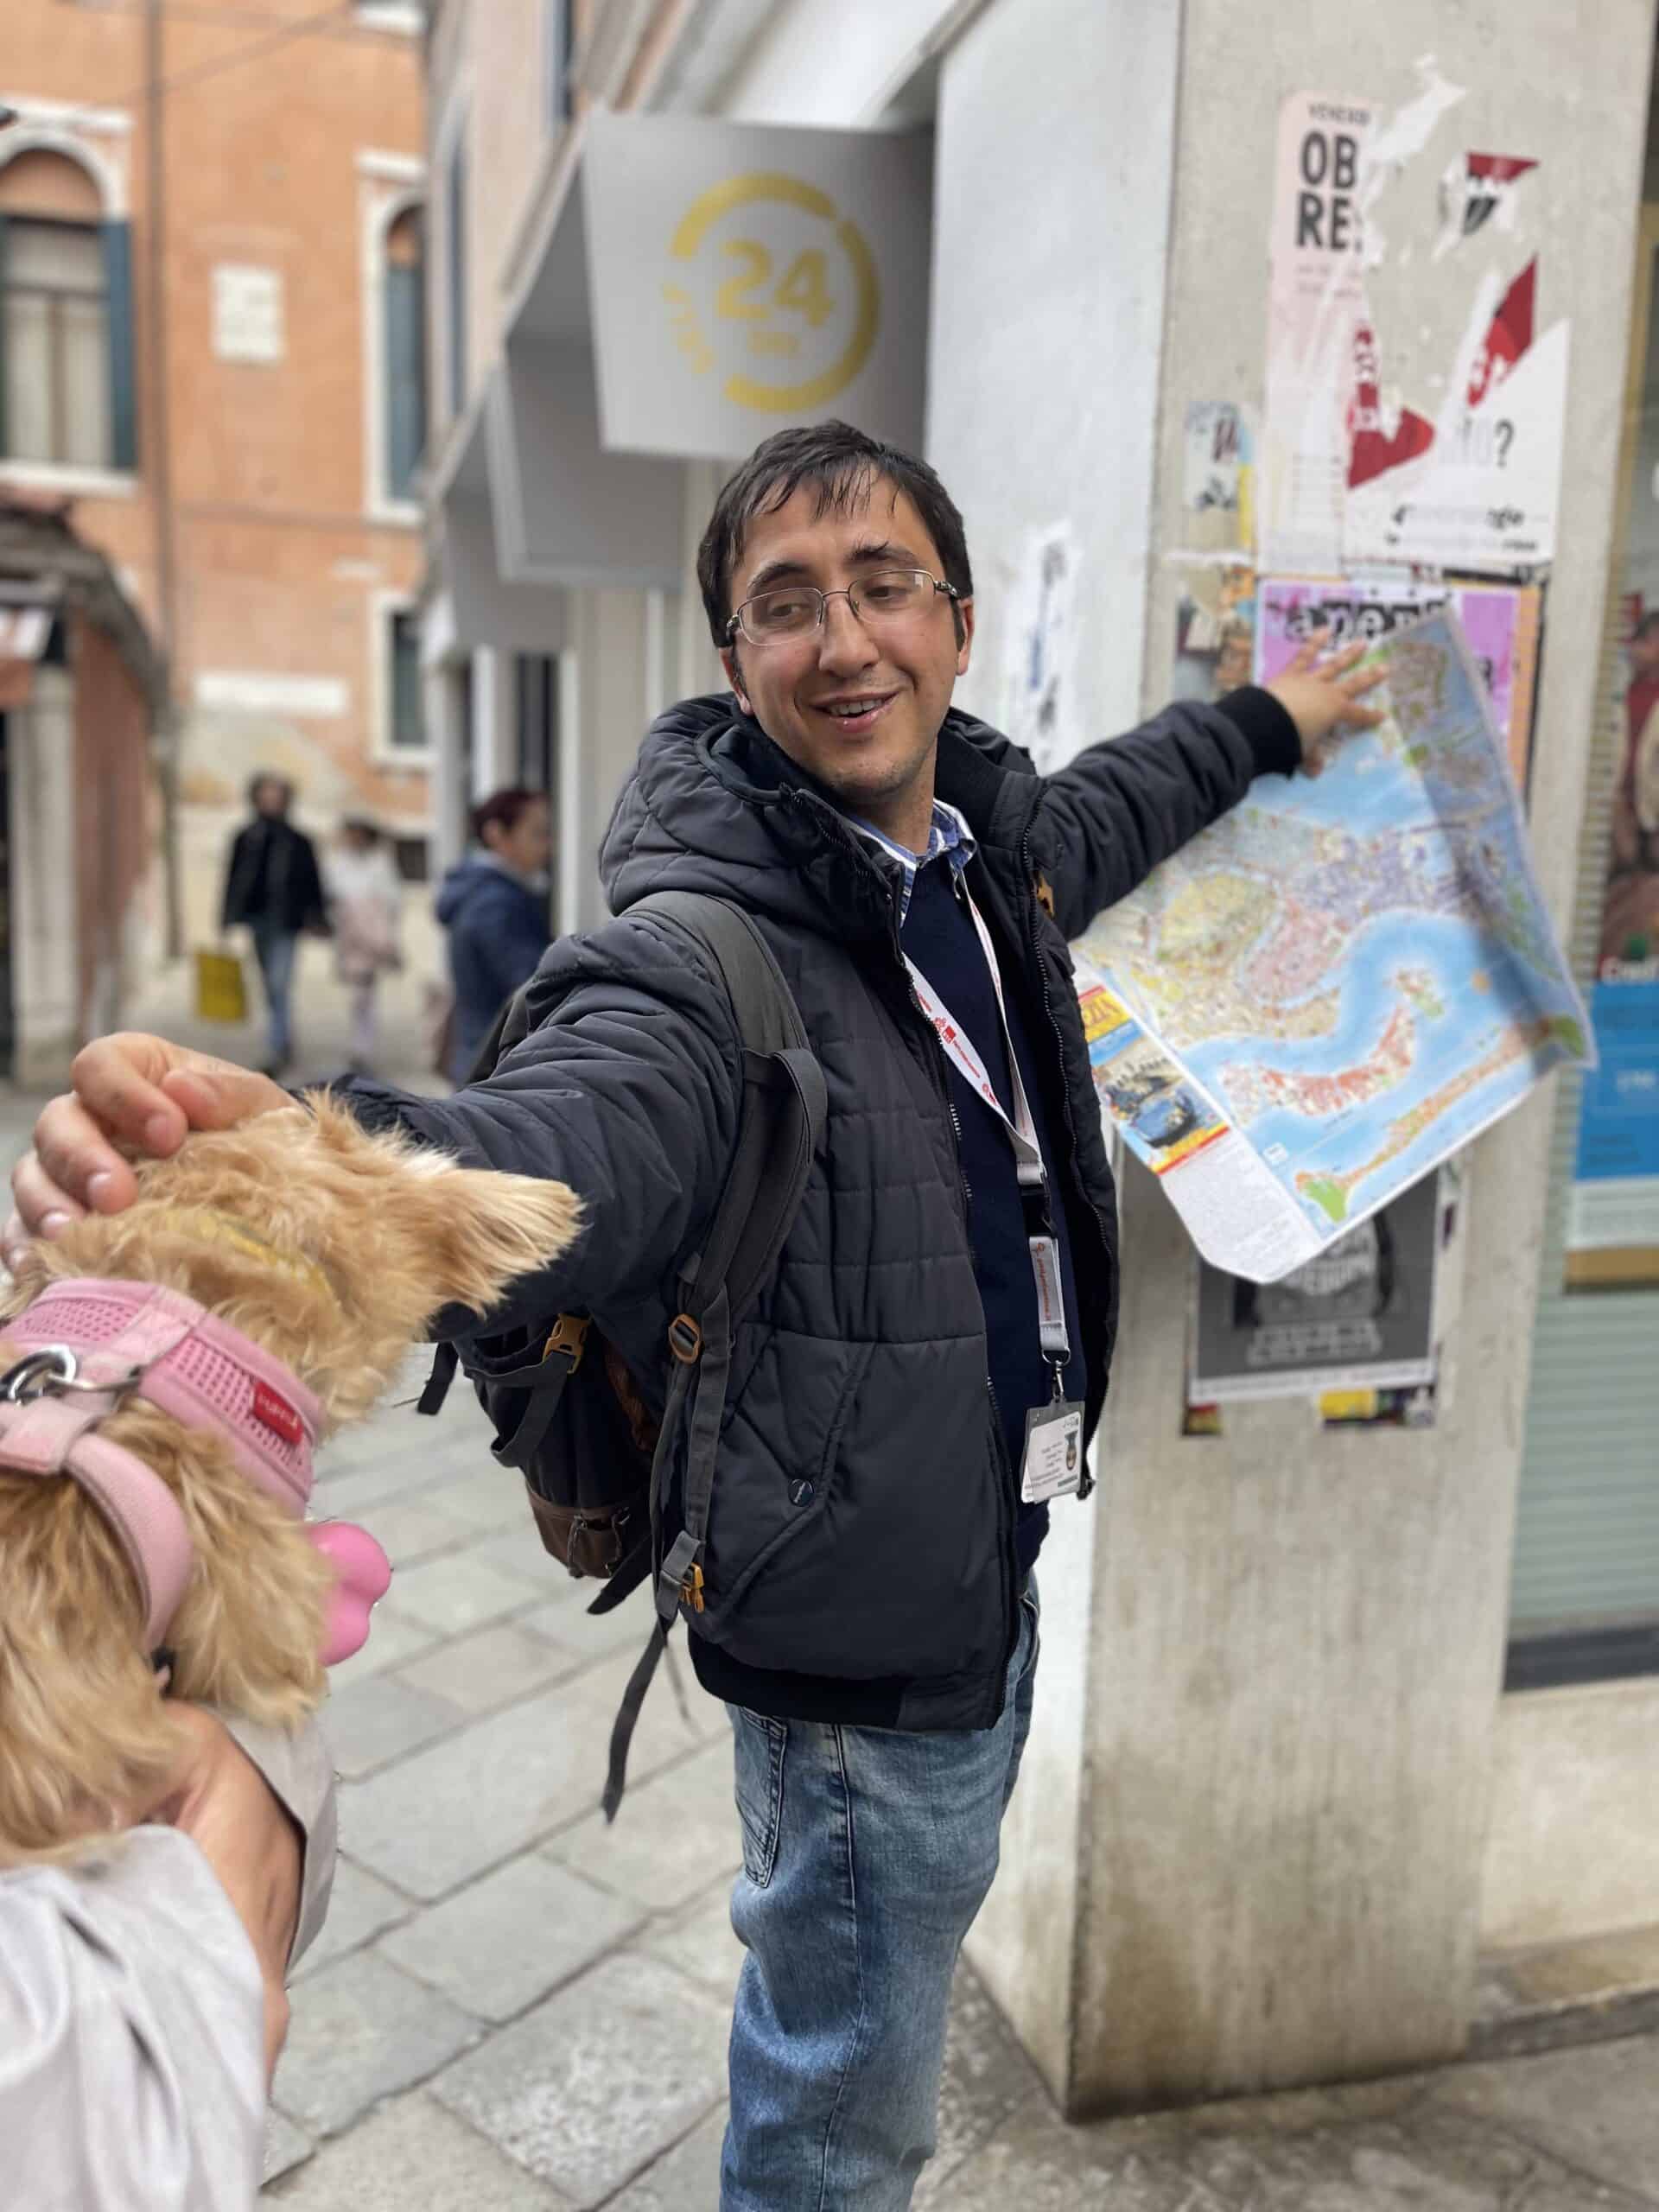 Pup Sheila getting pets from our walking tour guide as we traveled through Venice Italy